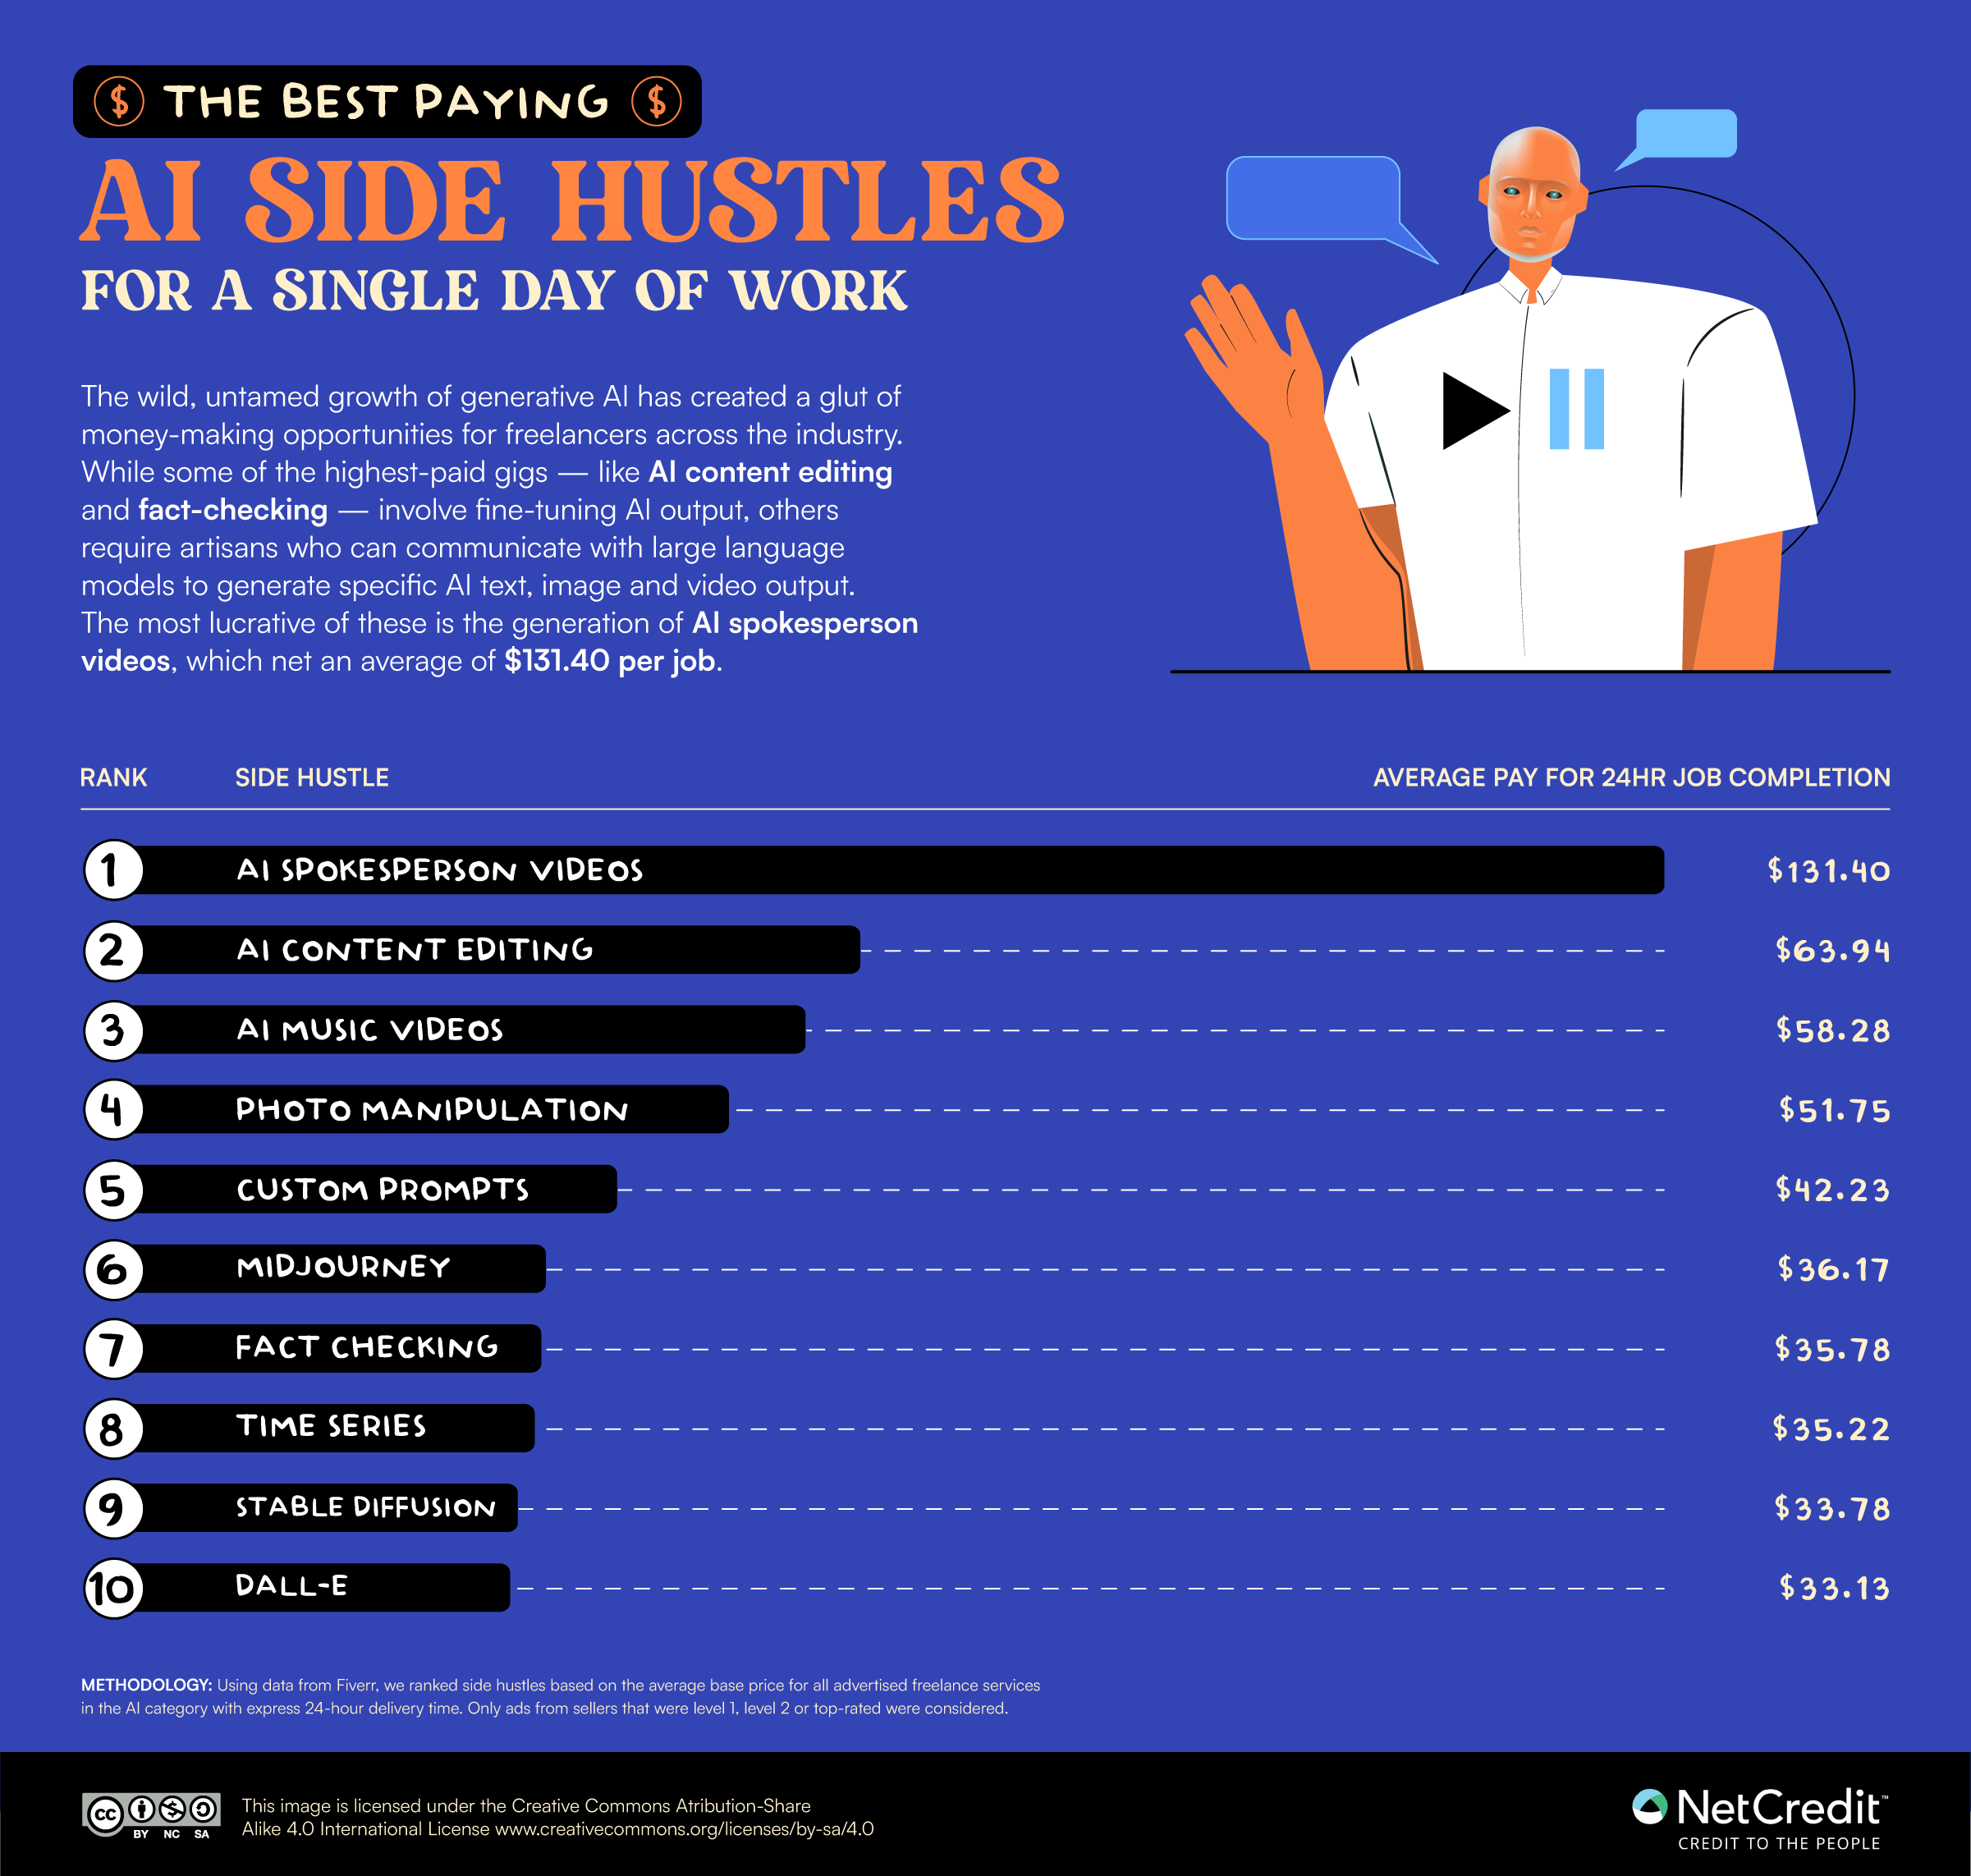 Ranking of the best paying AI side hustles